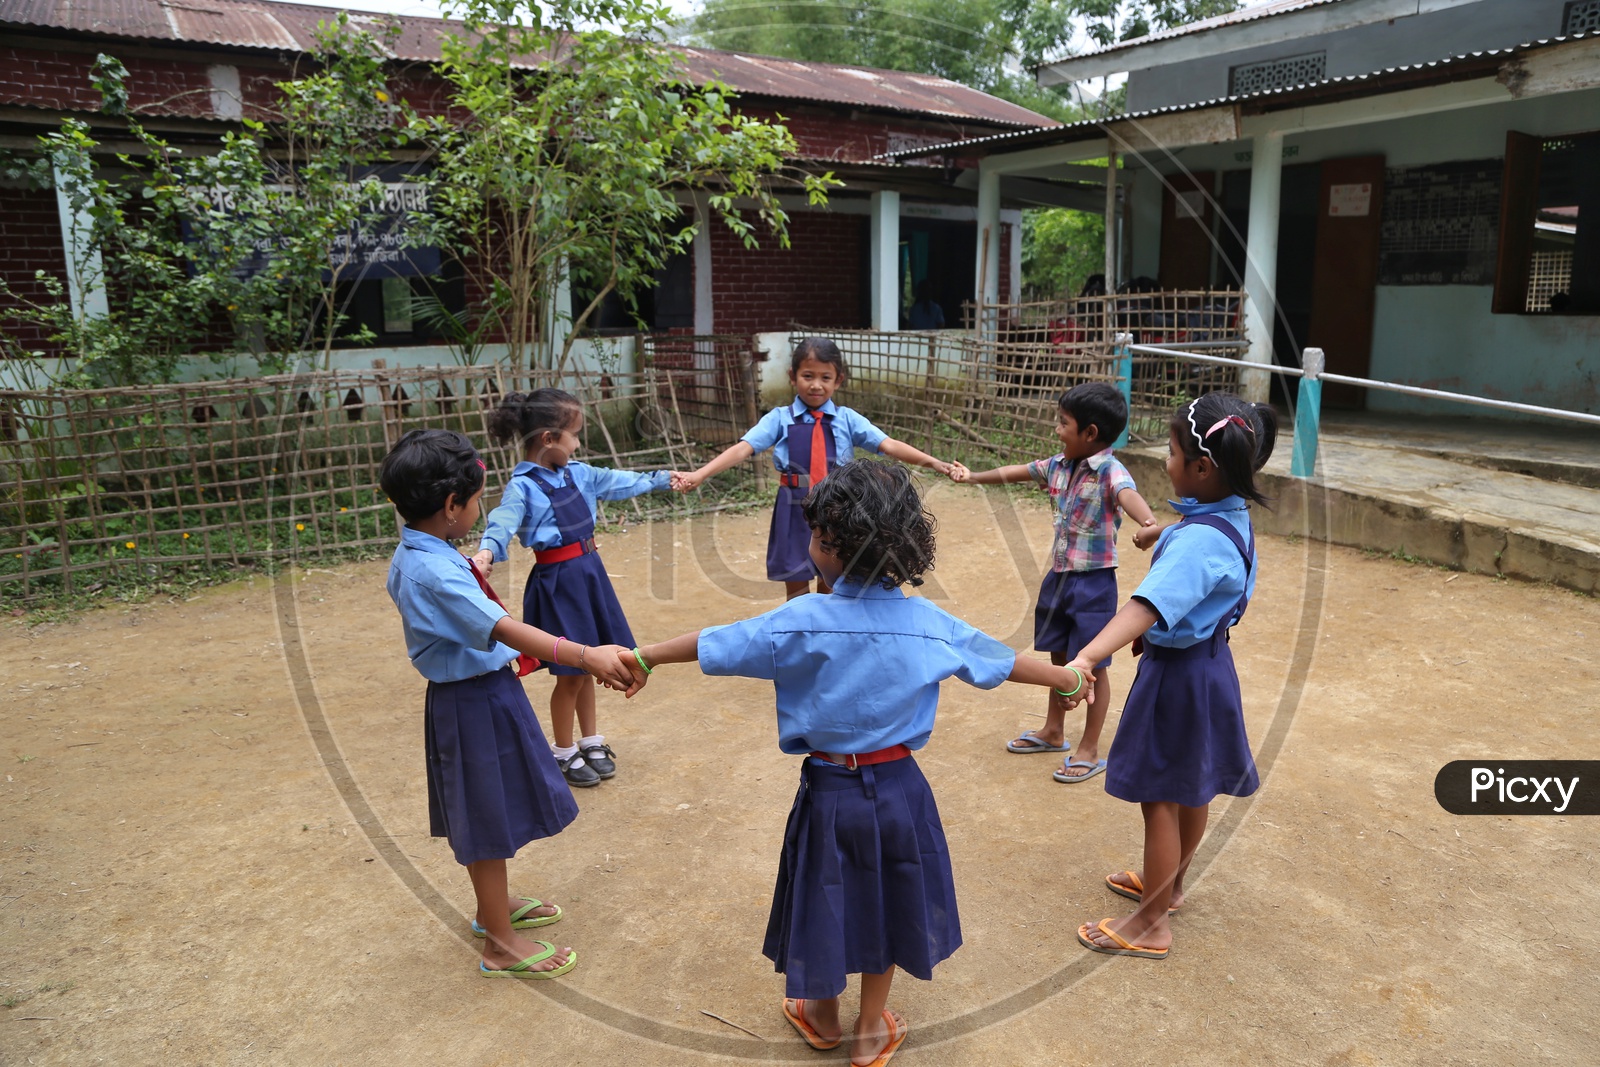 School children Or  School Students Wearing Uniforms And Playing Happily  in a Rural Village School Compound Or Premise